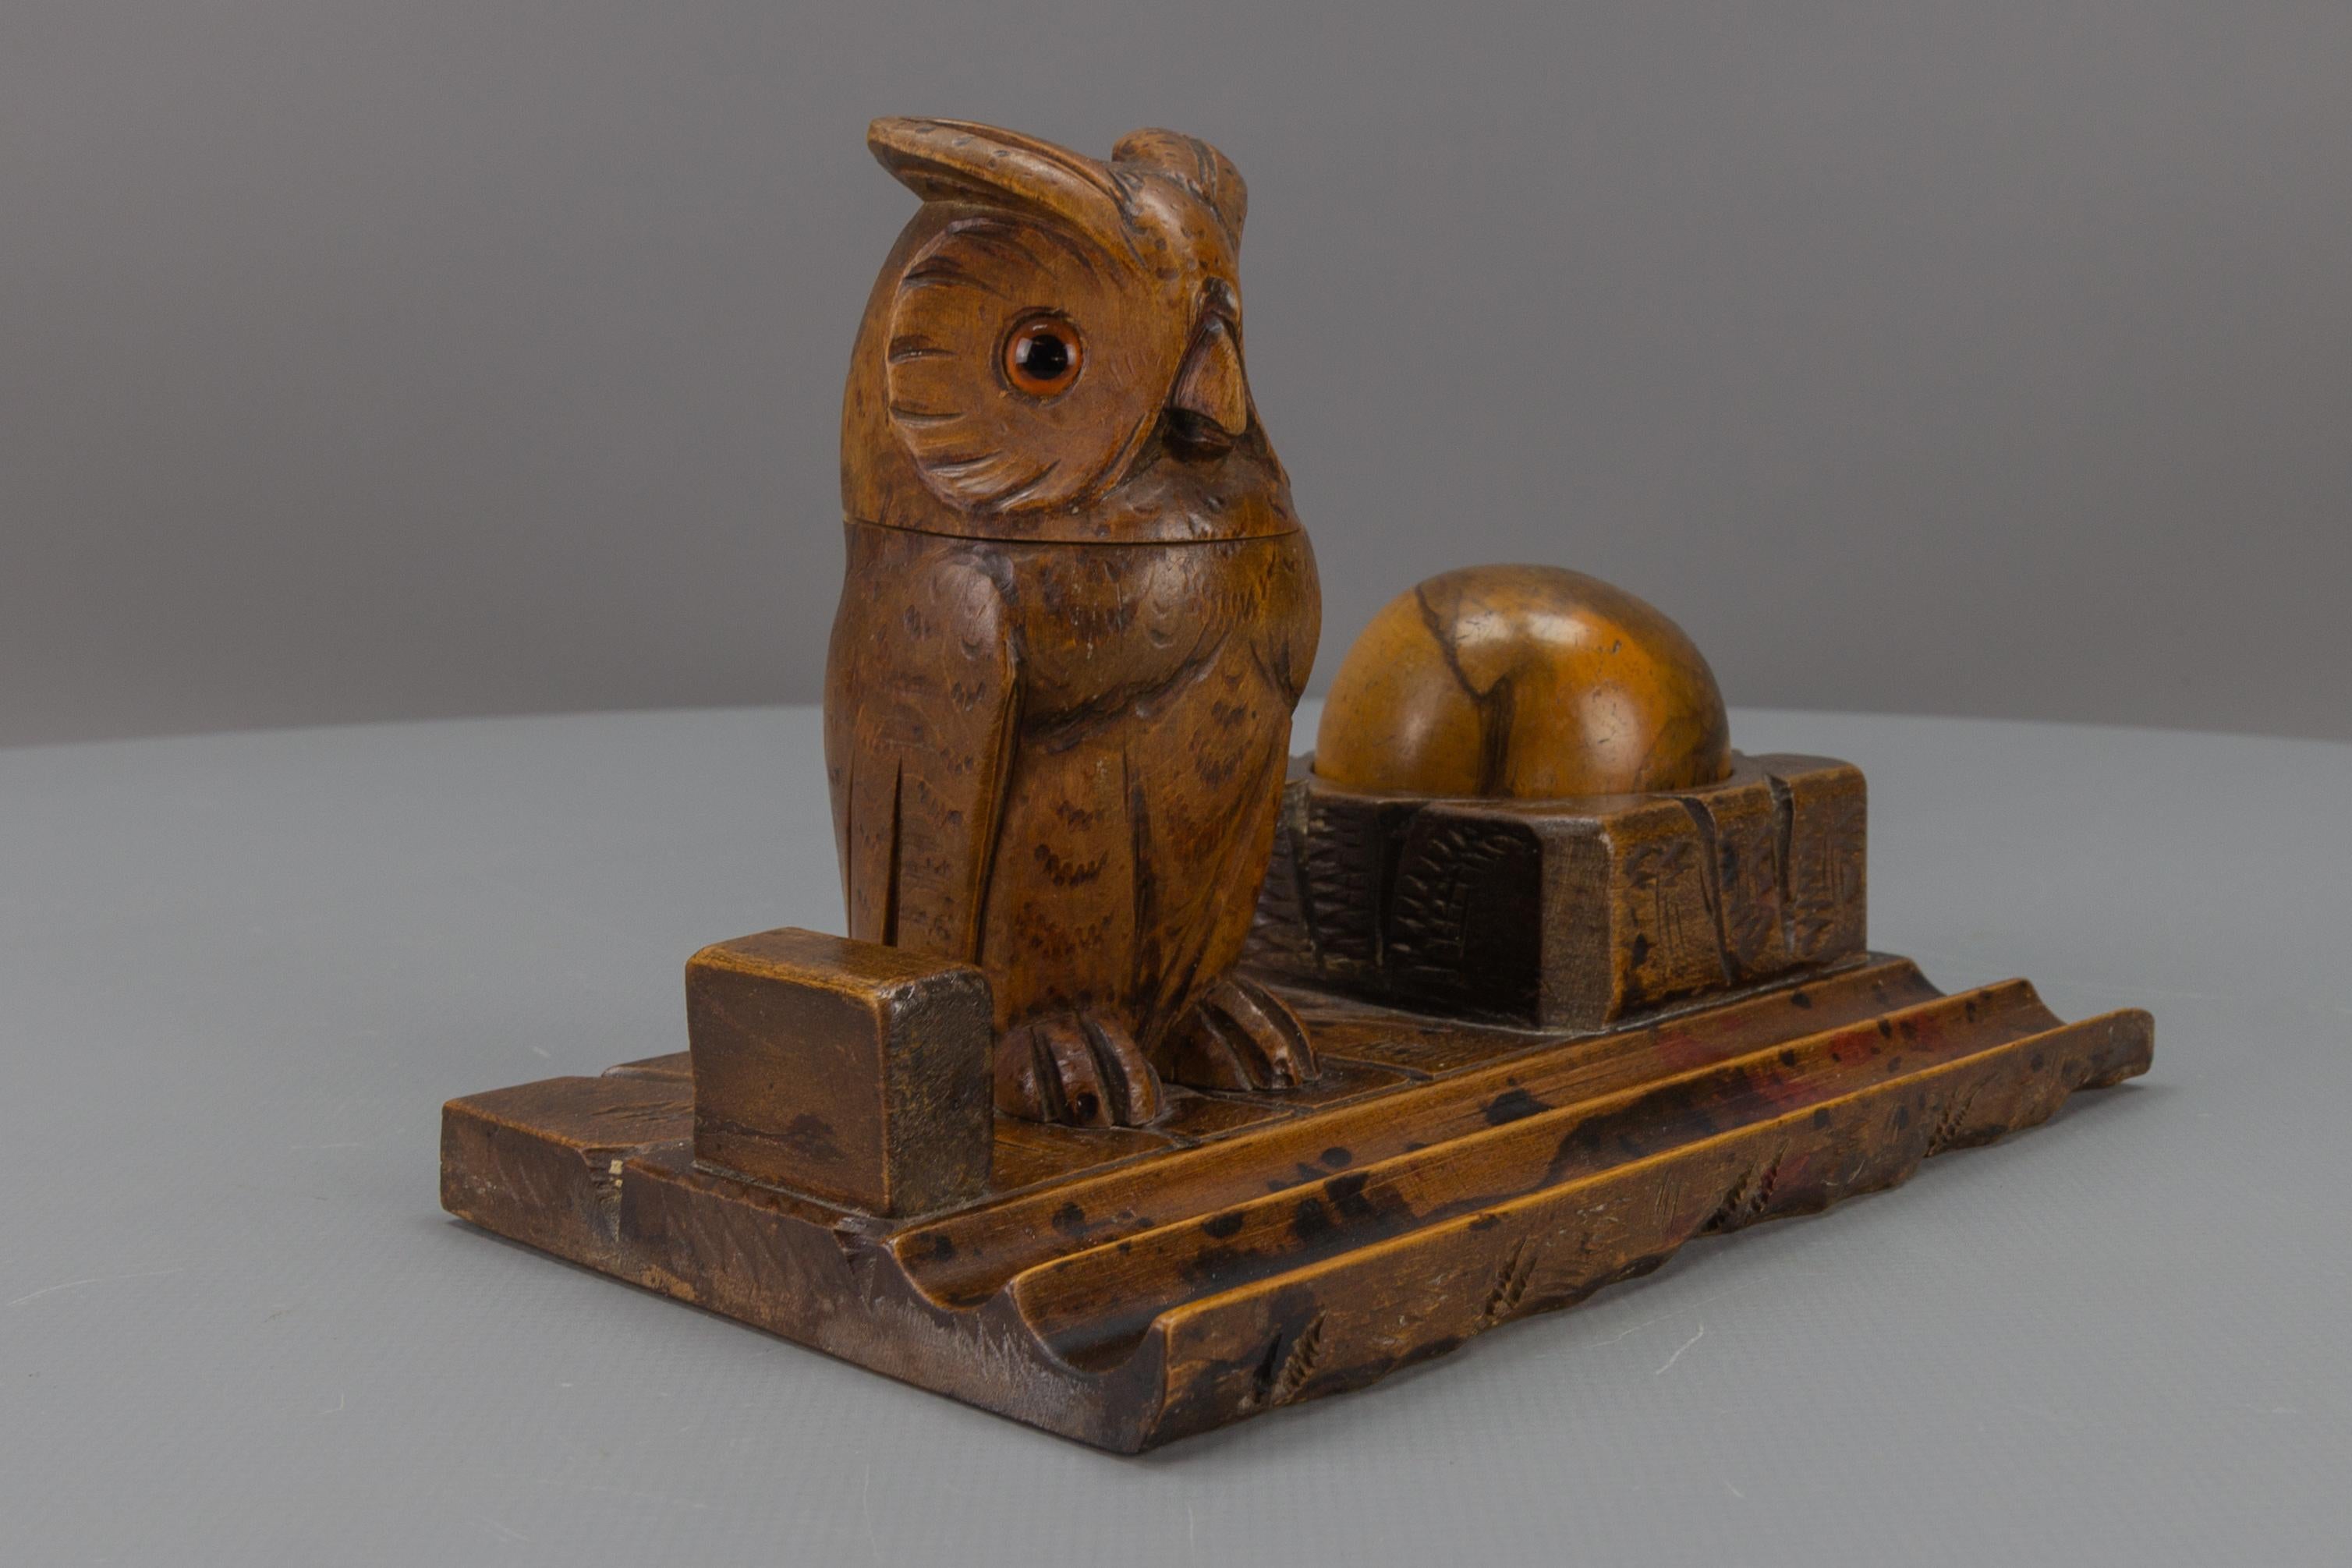 Beautiful Art Deco style hand-carved wooden inkwell or pen stand with a majestic owl figure with glass eyes. The stand features a tray for pens and accessories at the front. The head of the owl opens and there should be an inkpot but the place can